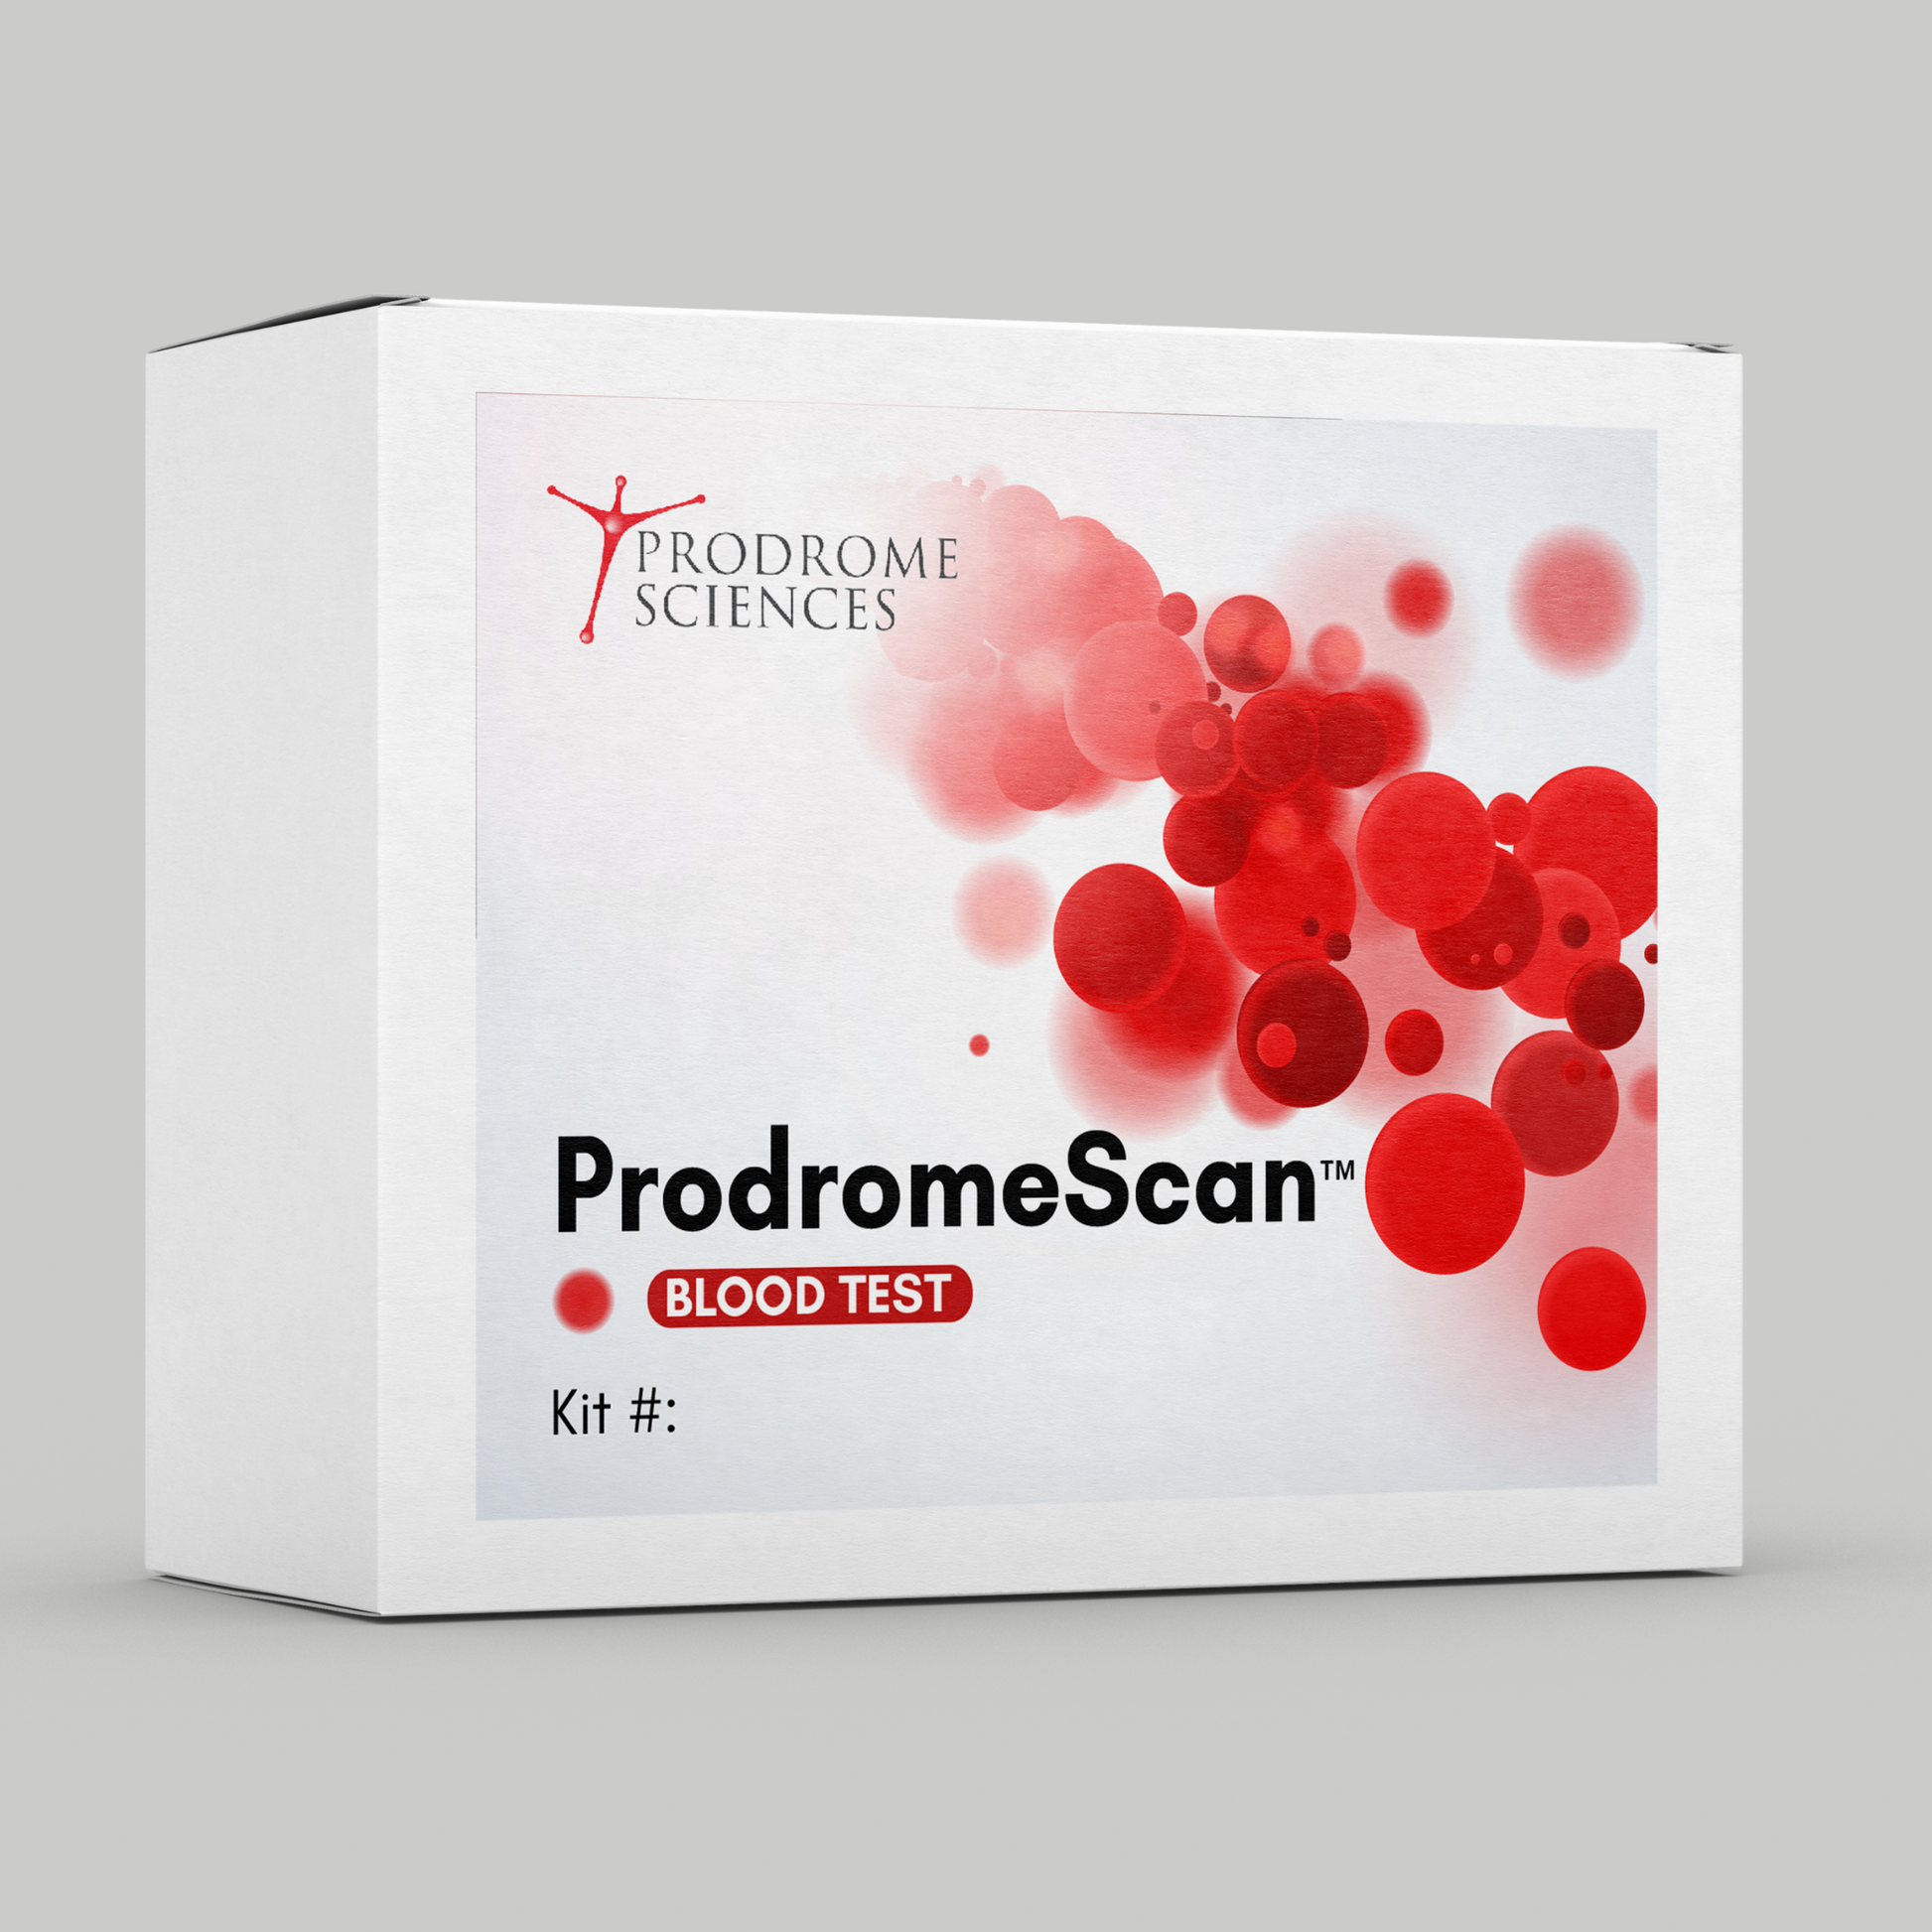 ProdromeScan™ blood test collection kit is designed to identify biochemical deficiencies and imbalances.